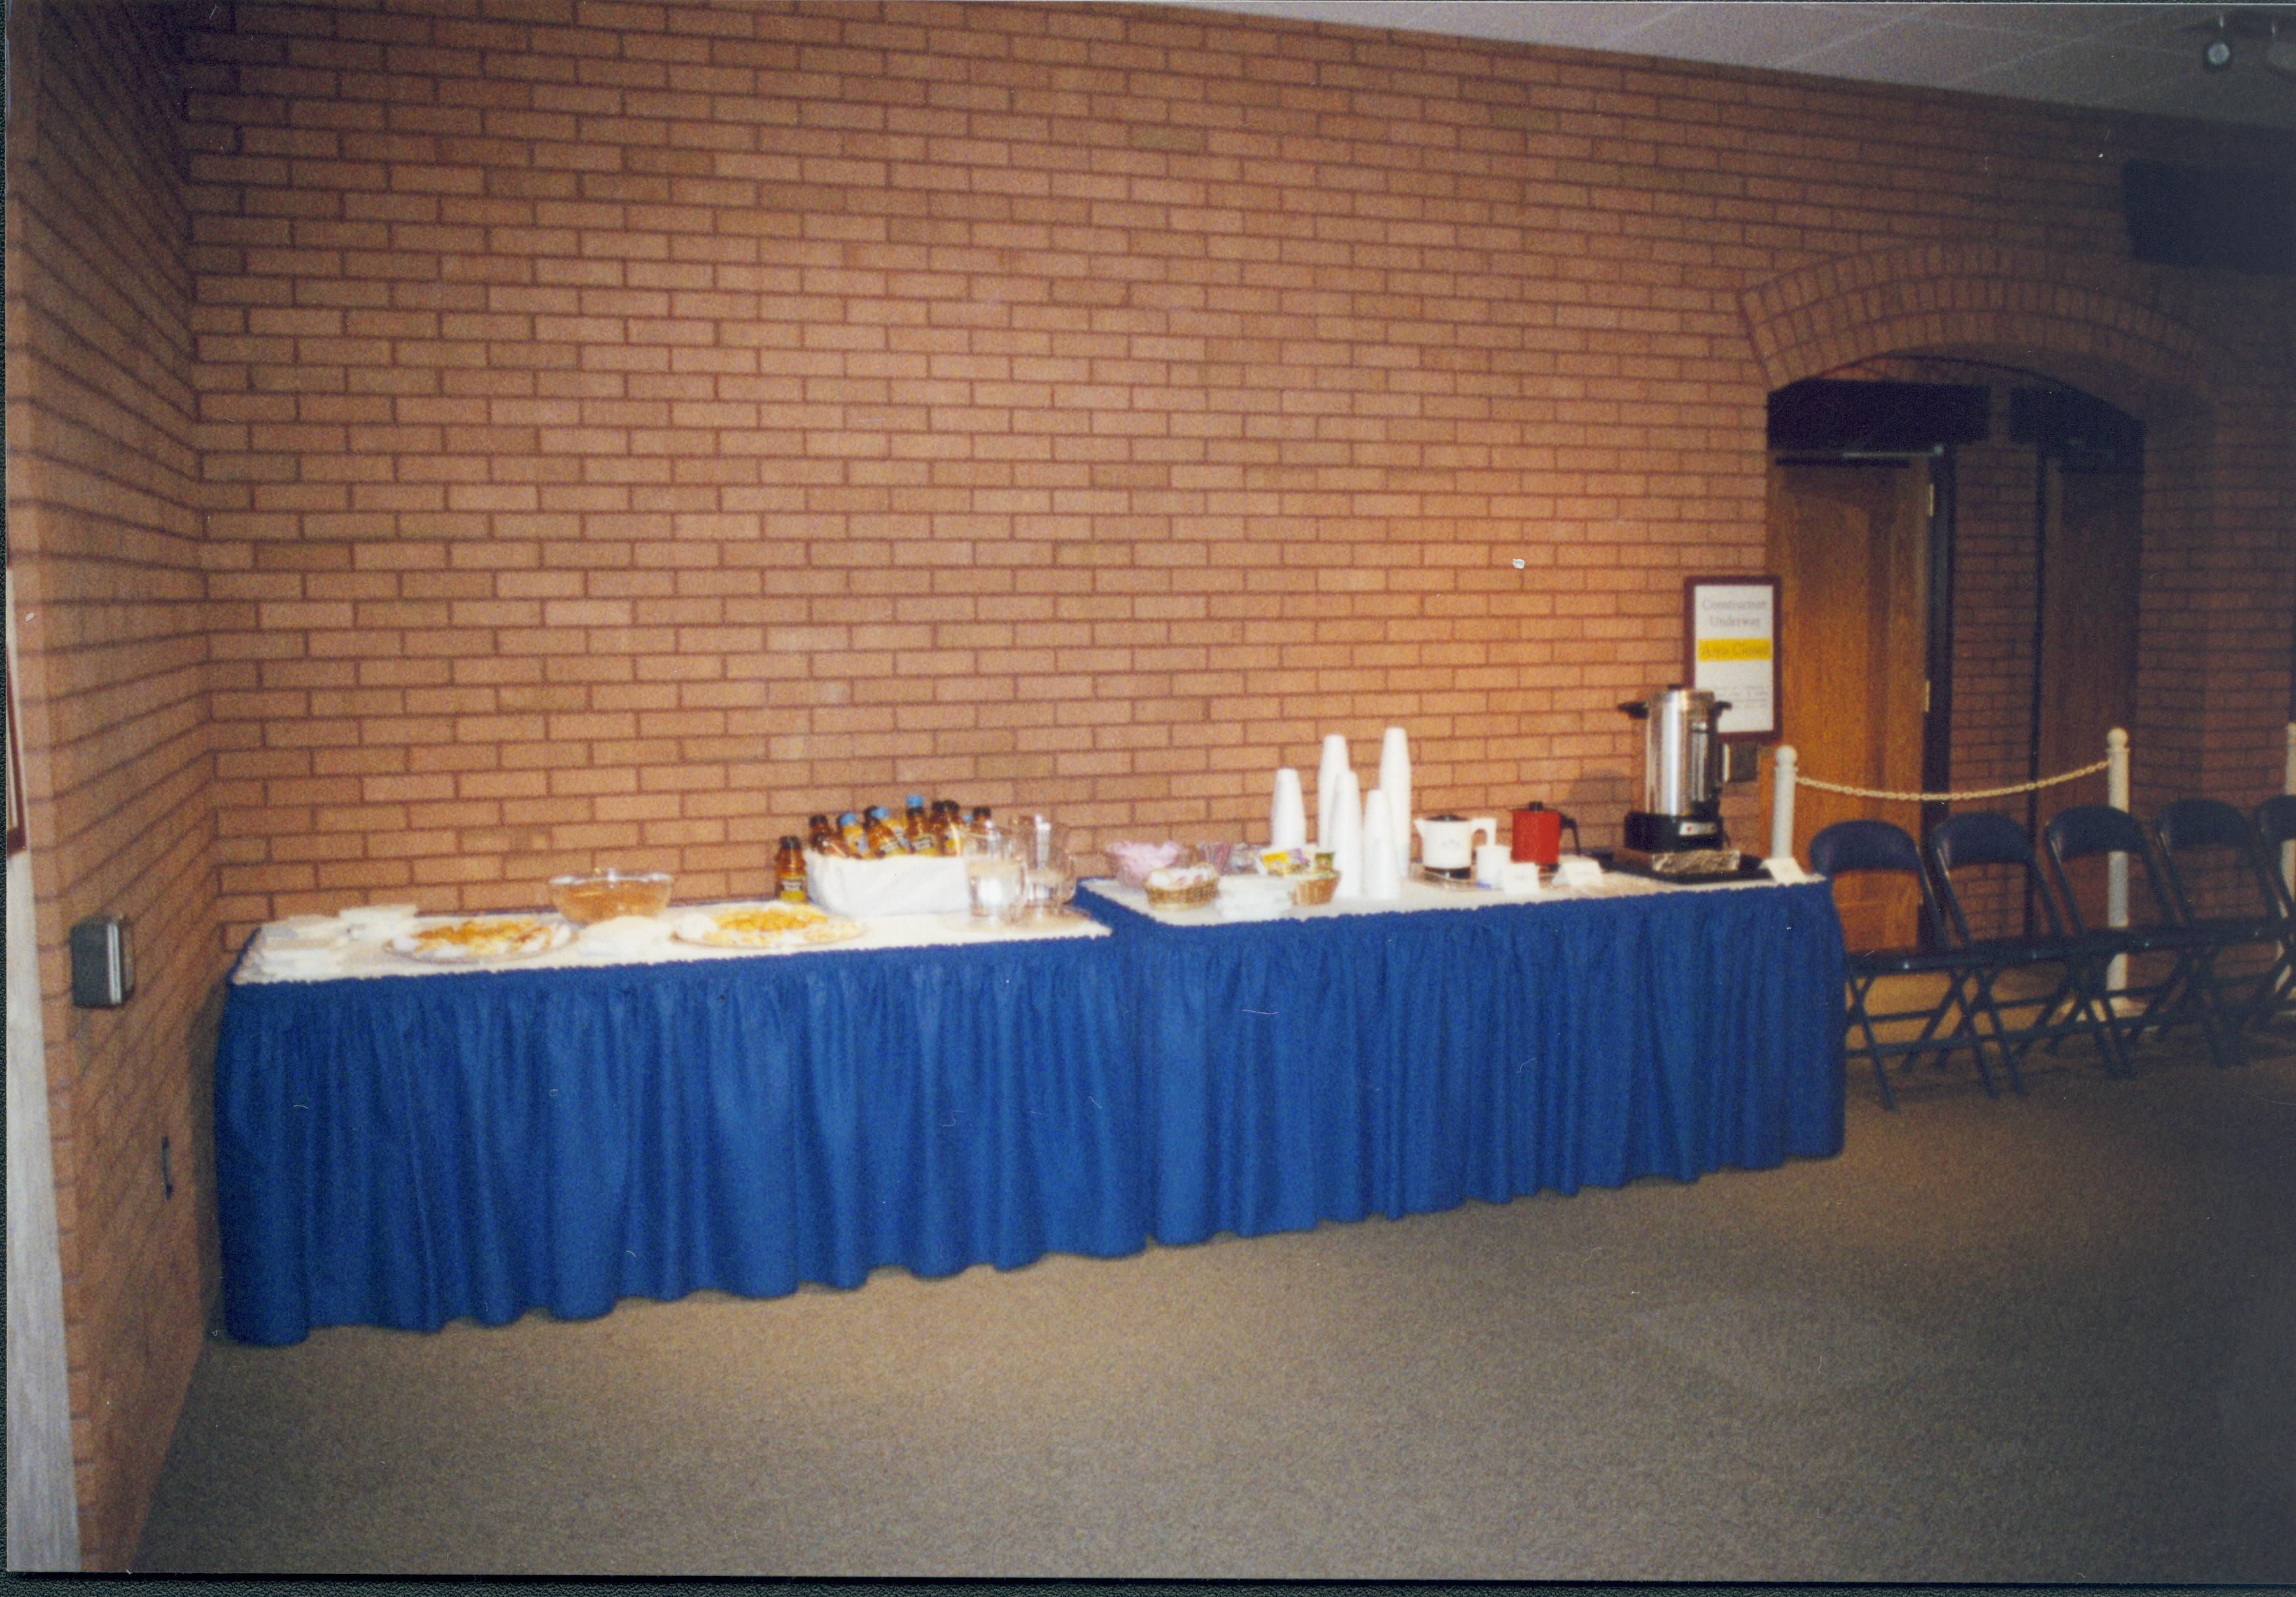 refreshment table Lincoln Home NHS- Lincoln Birthday, George Painter Lectures, Roll 2001-1 exp 13 refreshments, reception